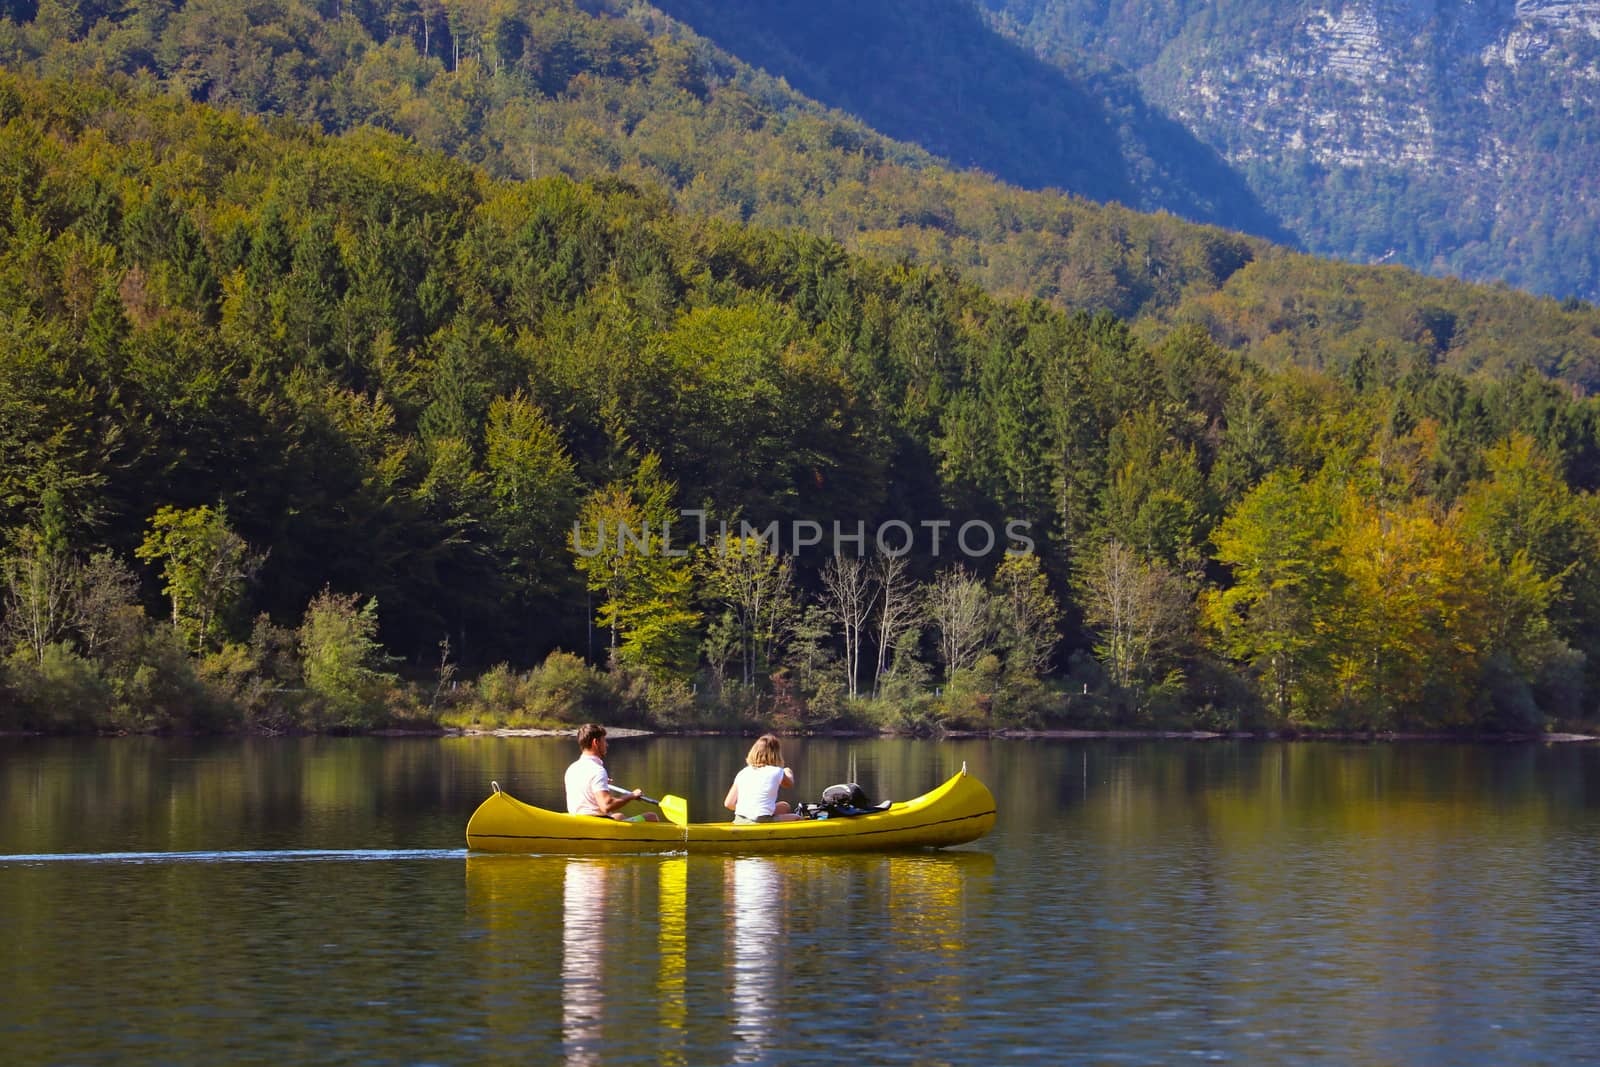 A young couple swims on a boat on a mountain lake or river